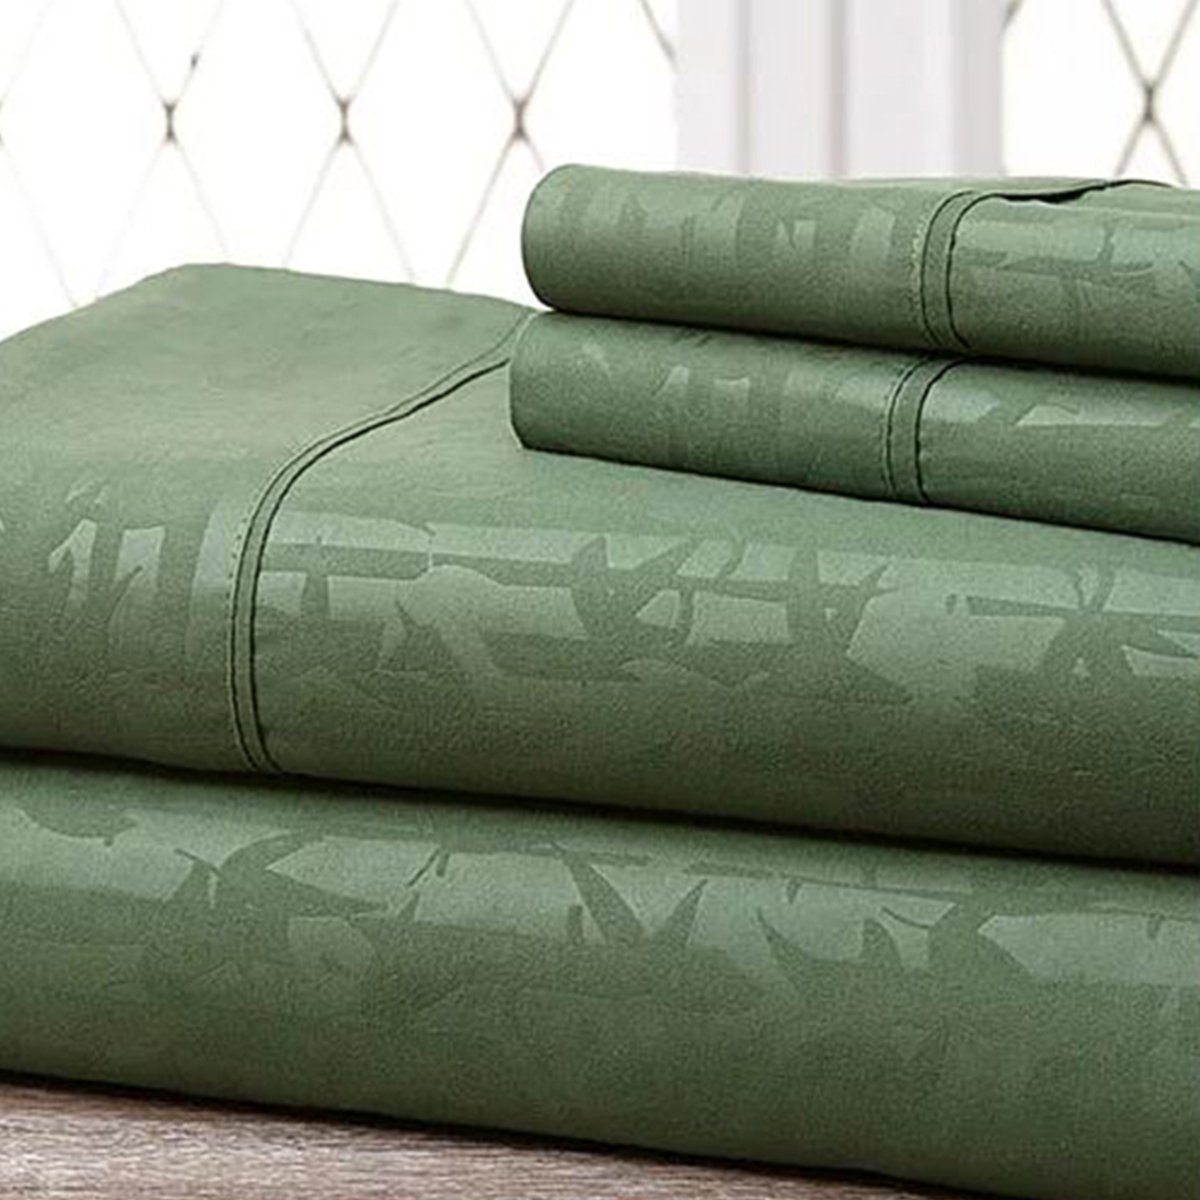 Super-soft 1600 Series Bamboo Embossed Bed Sheet, Hunter Green - Full, 4 Piece